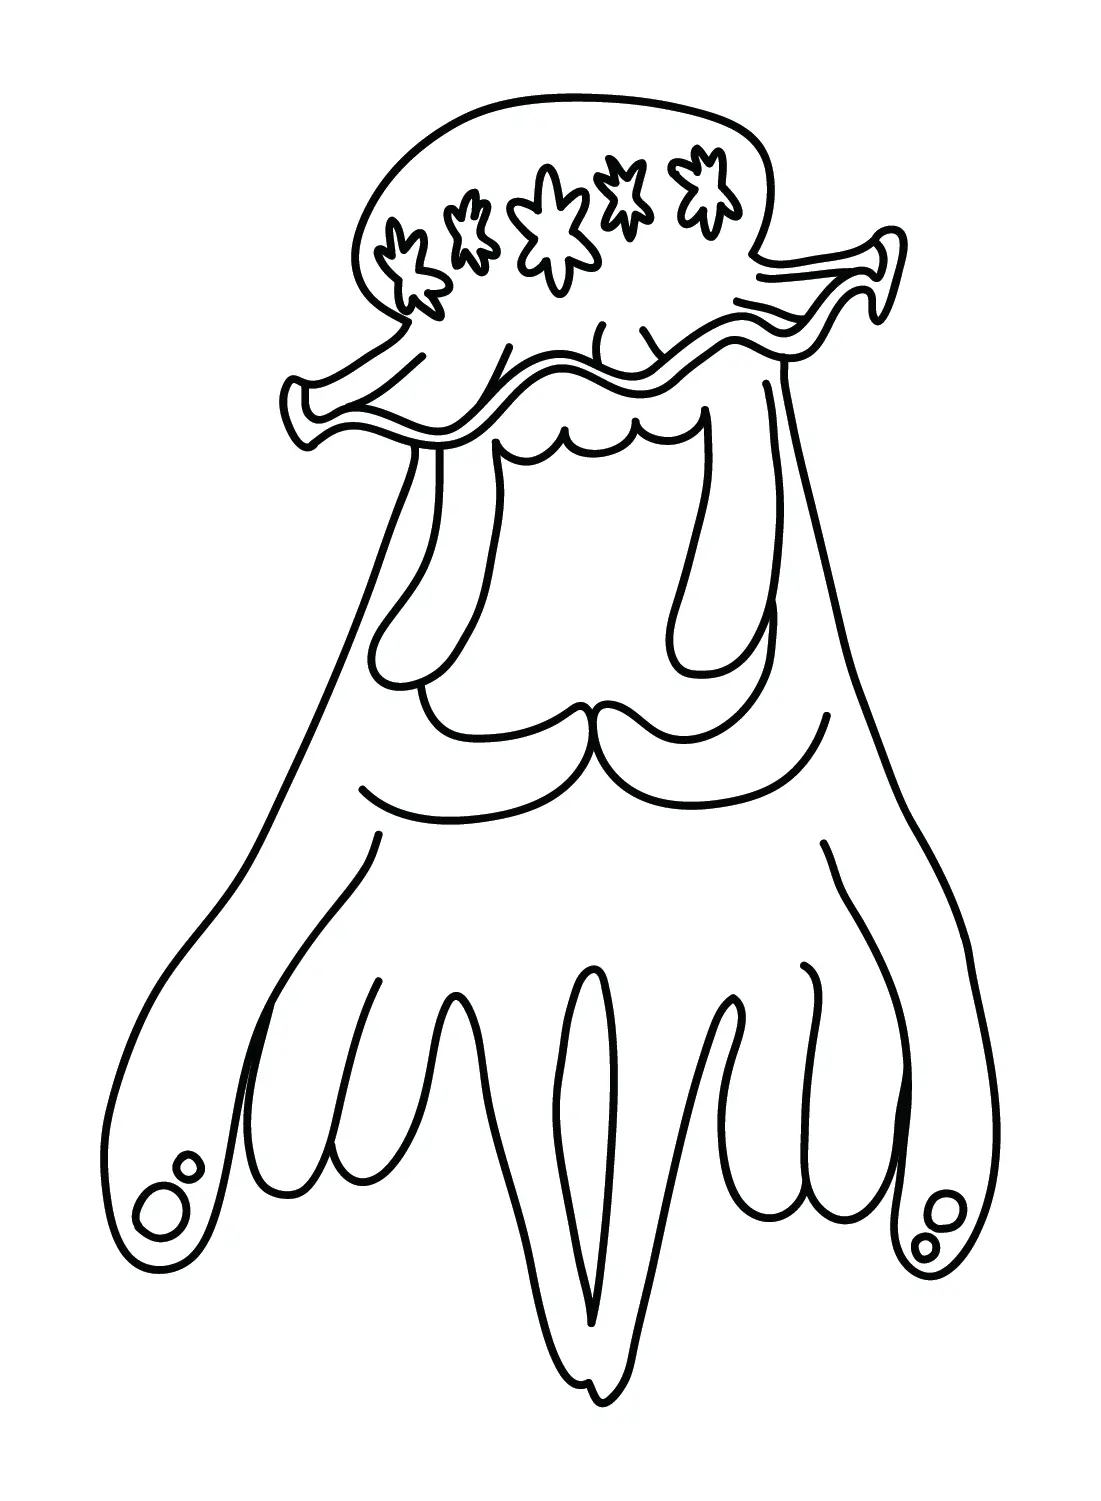 Nihilego Coloring Pages